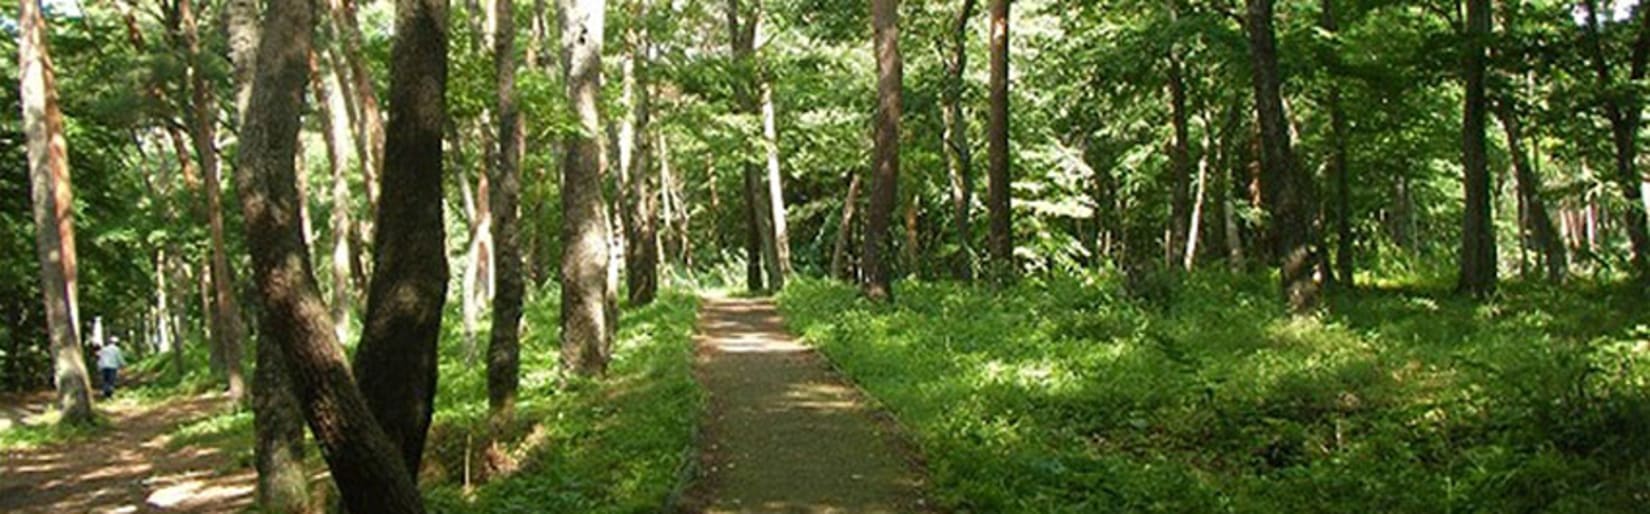 Ichimanpo-no-Mori Forest Bathing Trail | National Parks of Japan